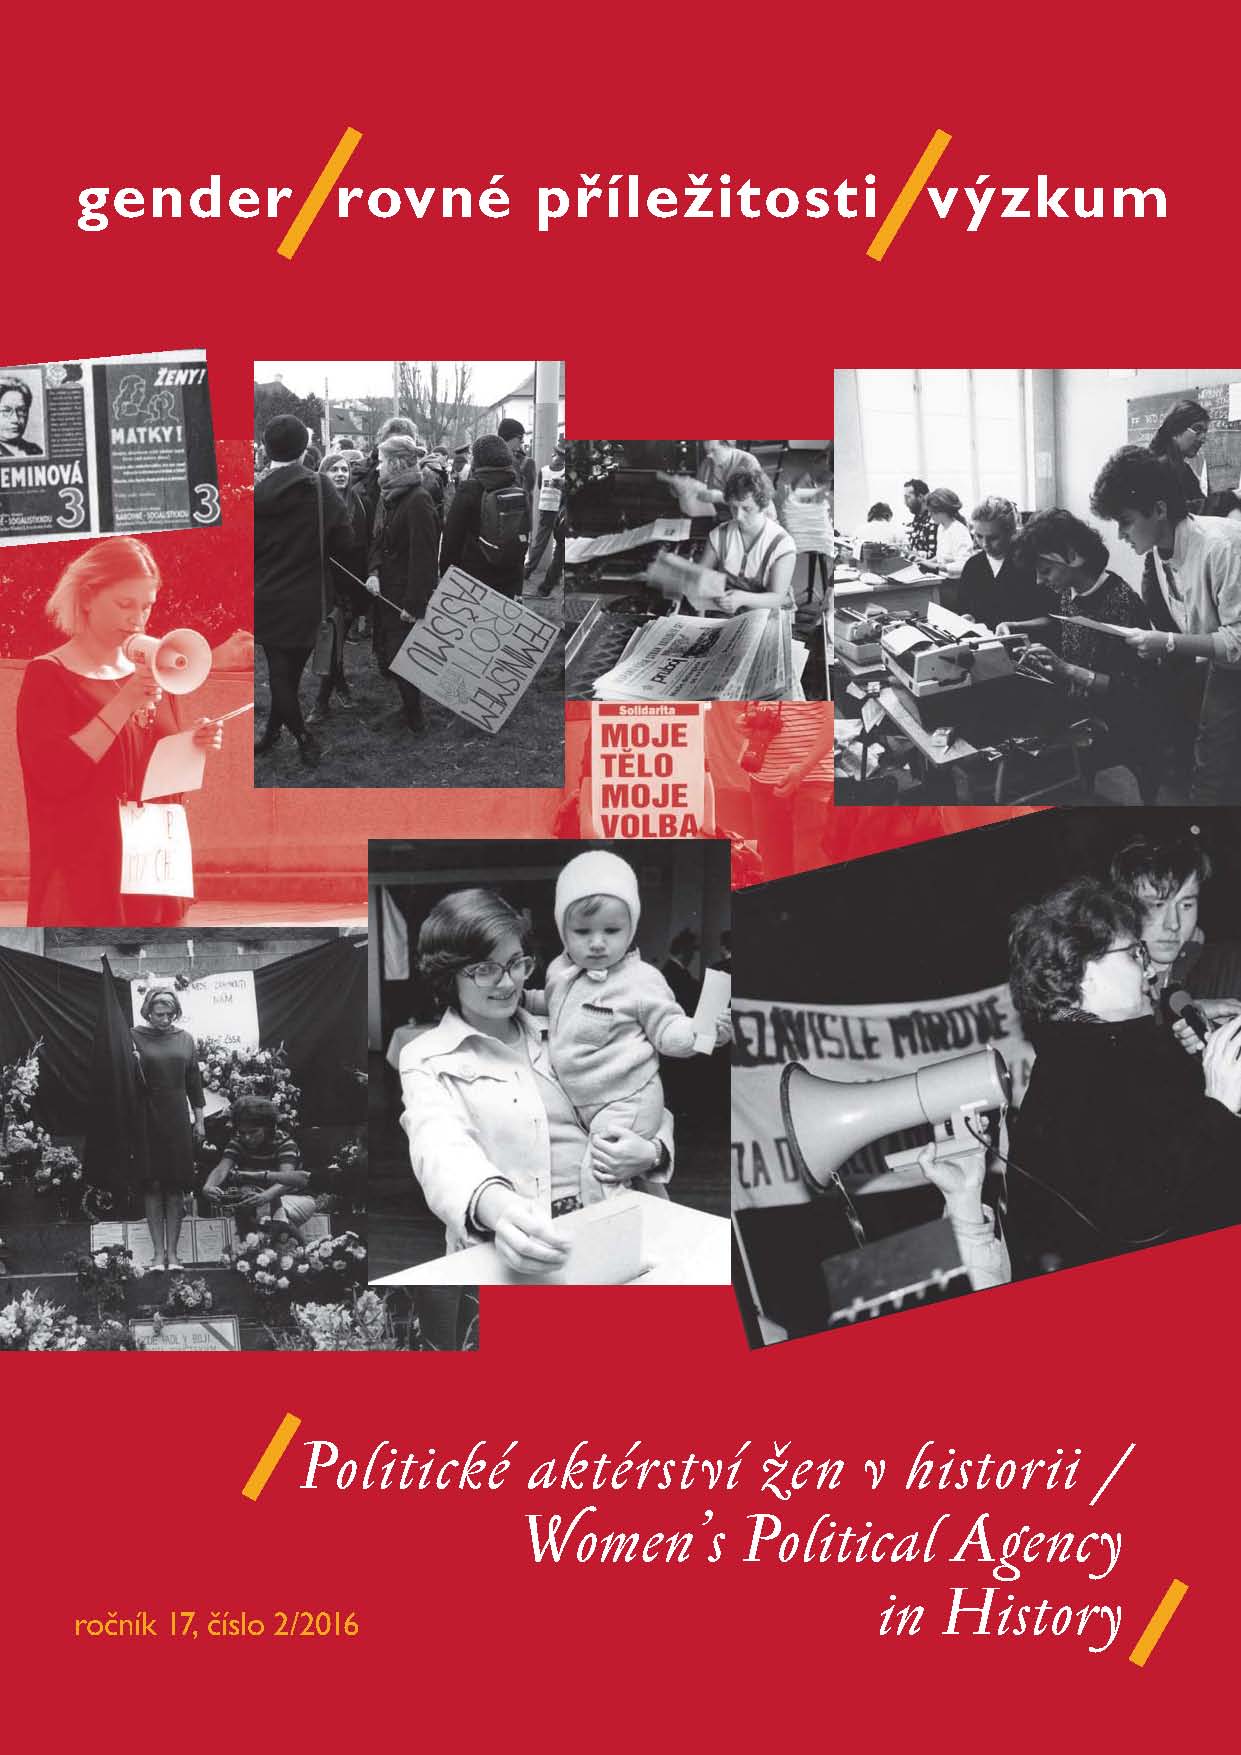 ‘Thank you for leaving all your good advice at the door’: On ASPEKT and Online Feminism in the Czecho-Slovak Context Cover Image